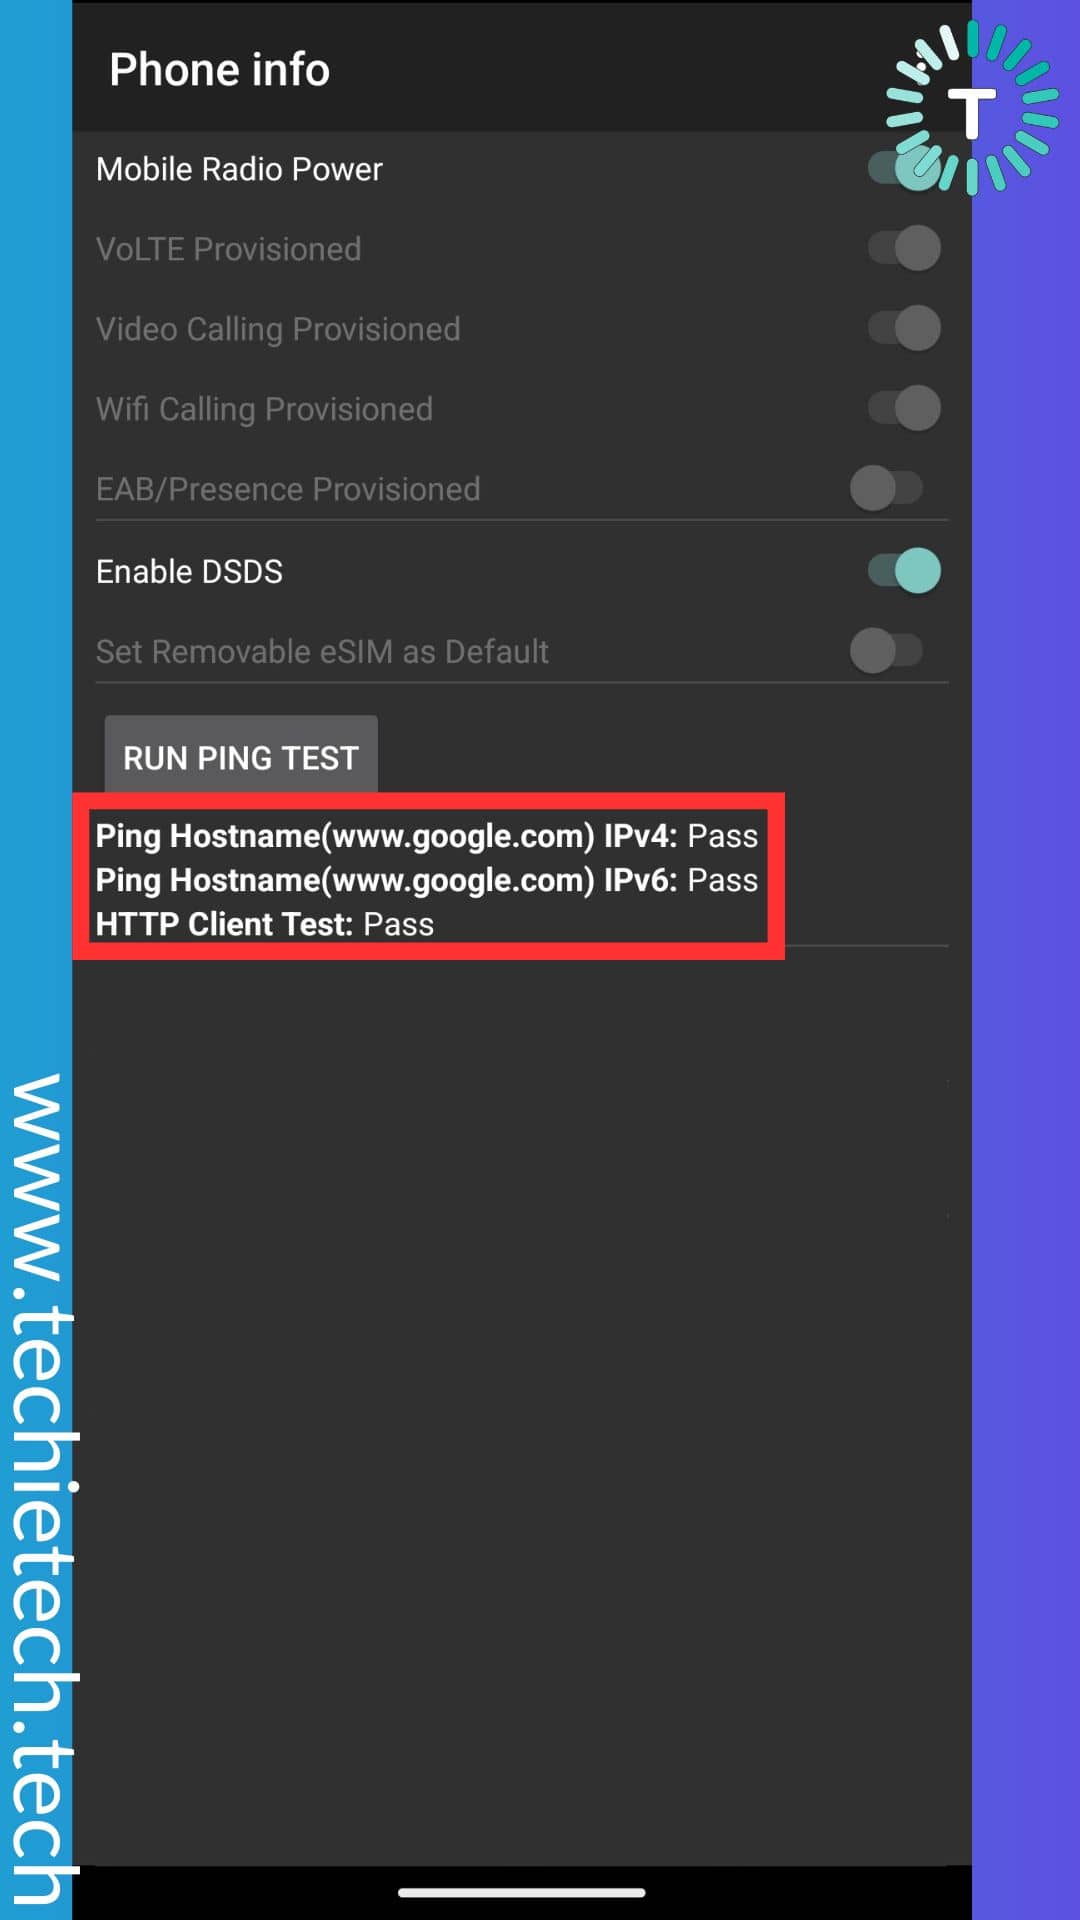 check if you can see Pass beside the options placed under RUN PING TEST button